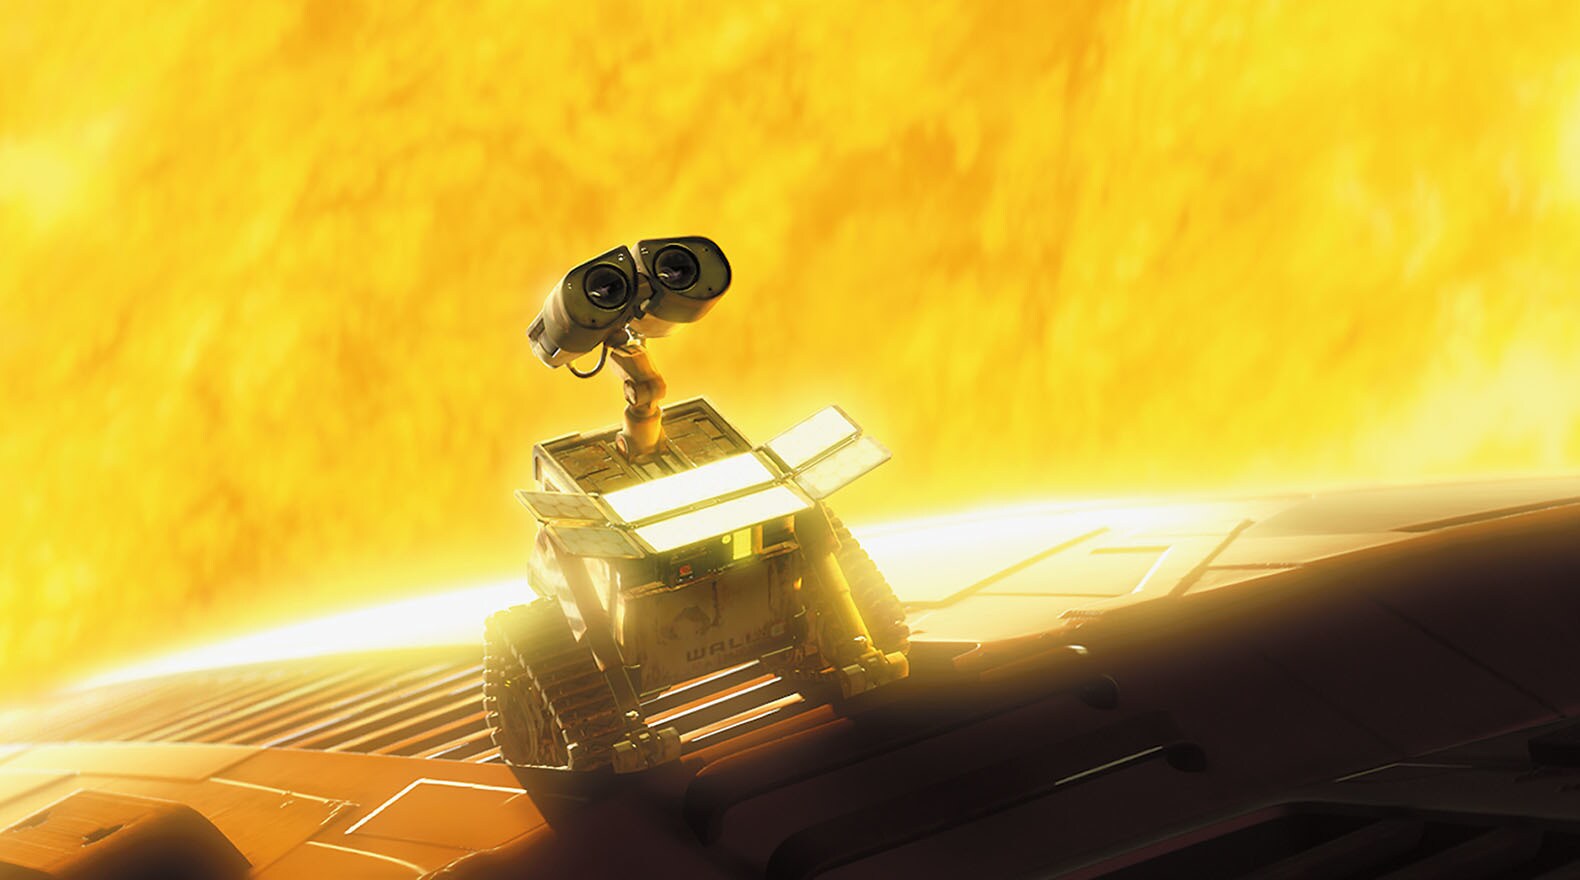 WALL•E is in a prime spot to catch some solar rays from the movie "Wall-E"